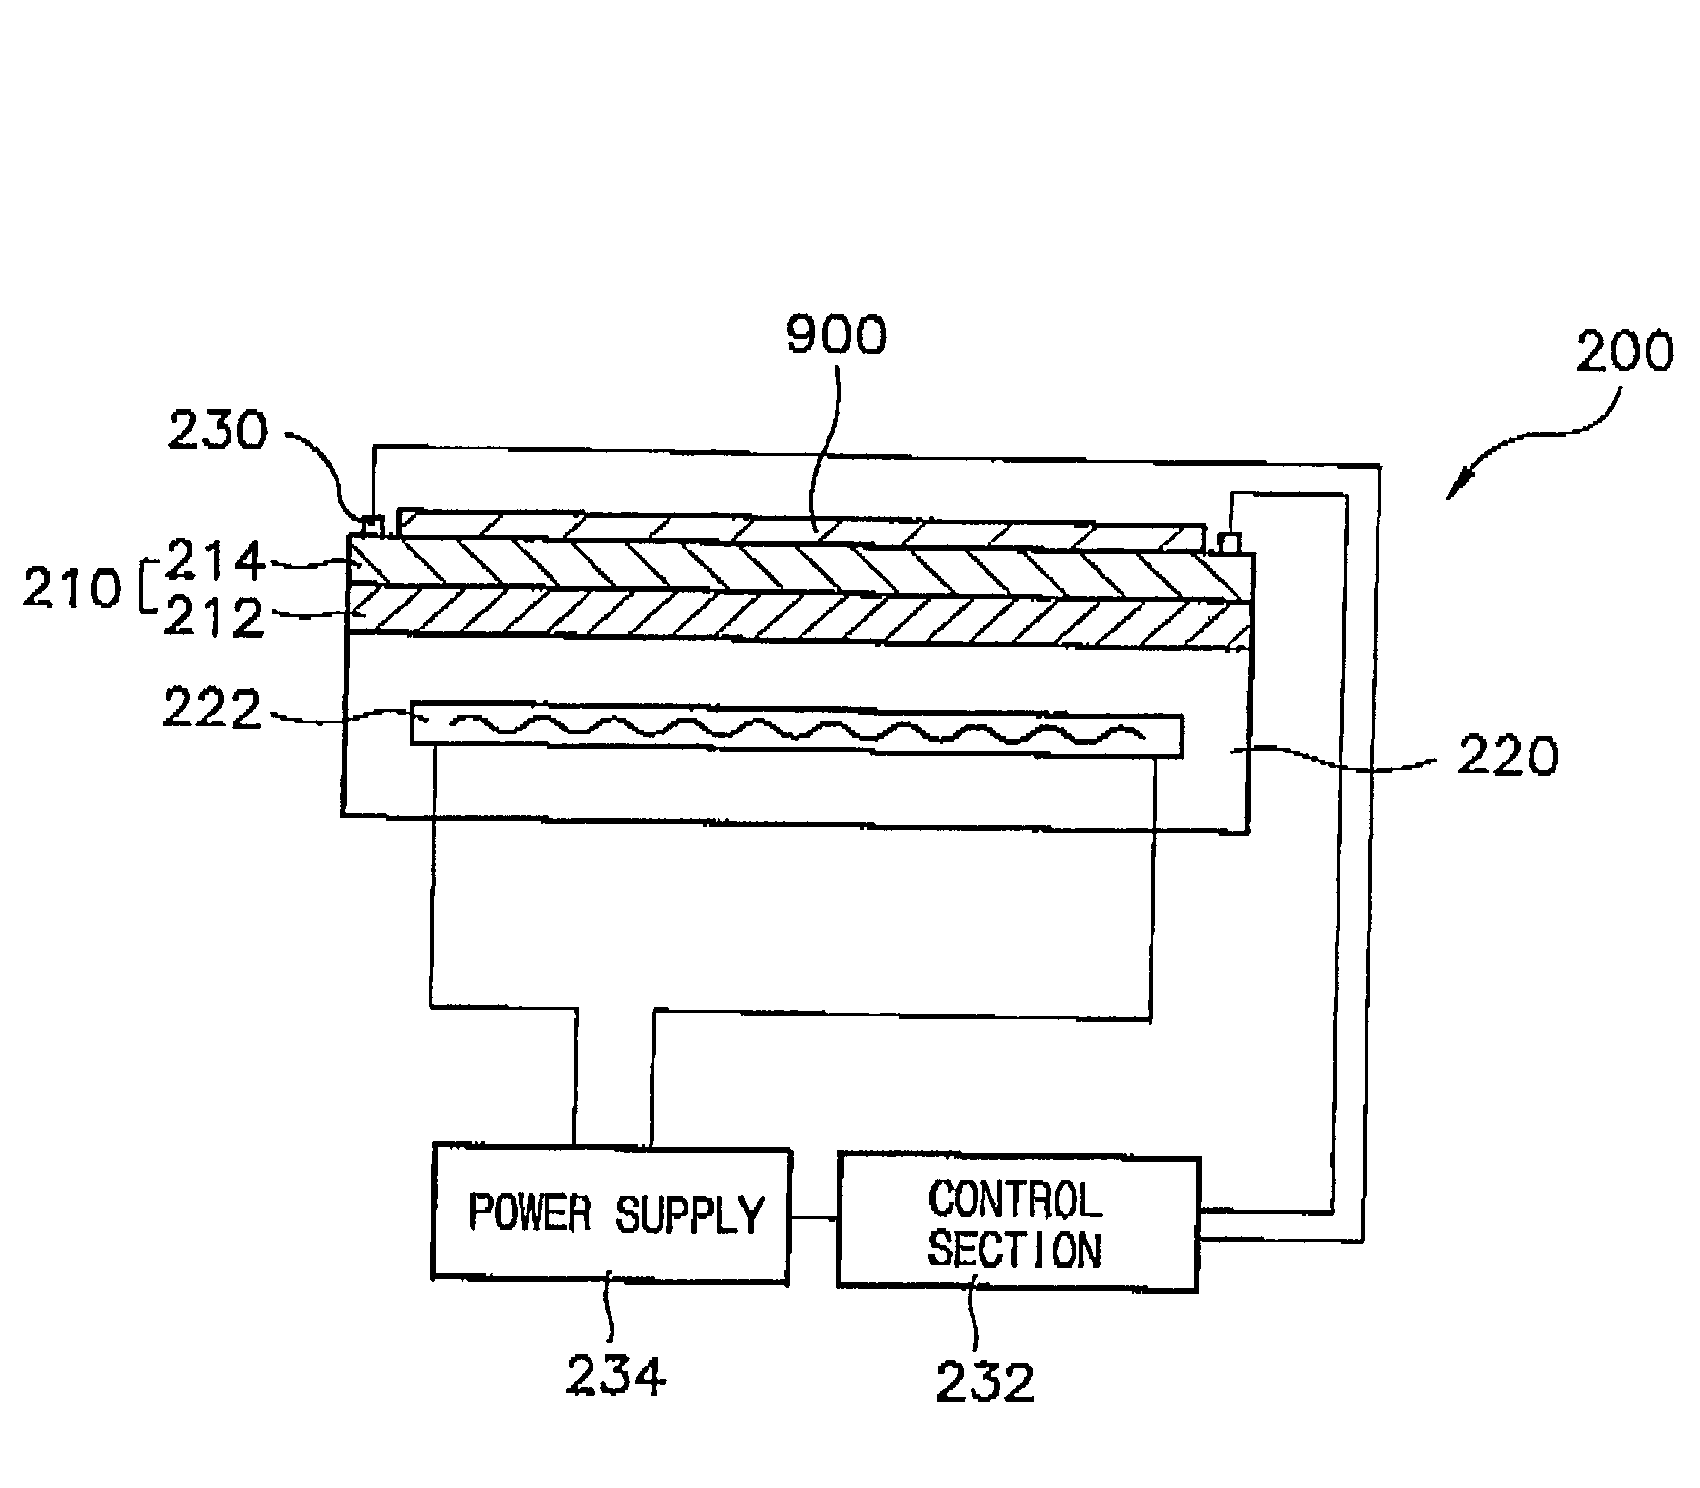 Apparatus for processing a substrate including a heating apparatus